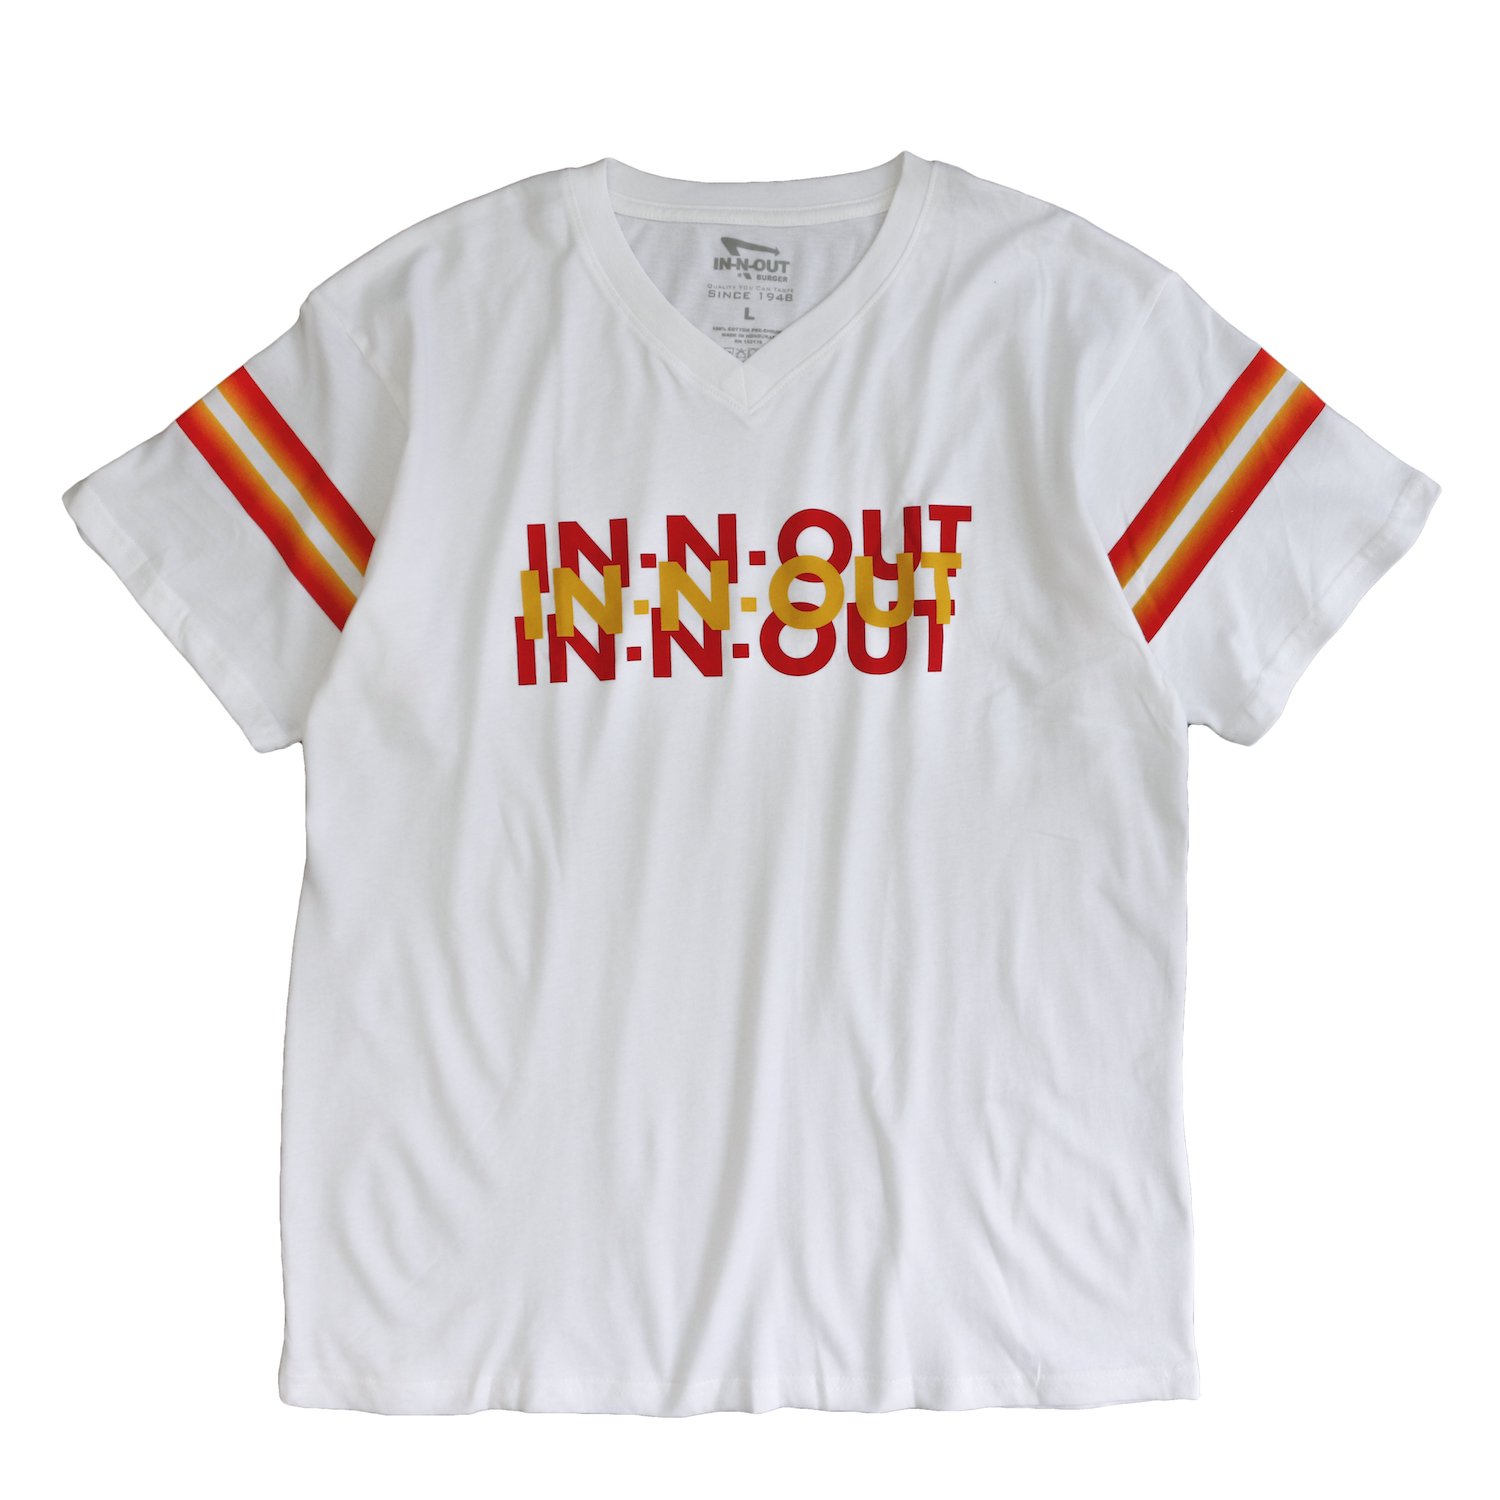 <img class='new_mark_img1' src='https://img.shop-pro.jp/img/new/icons8.gif' style='border:none;display:inline;margin:0px;padding:0px;width:auto;' /> IN-N-OUT / VINTAGE FOOTBALL TEE